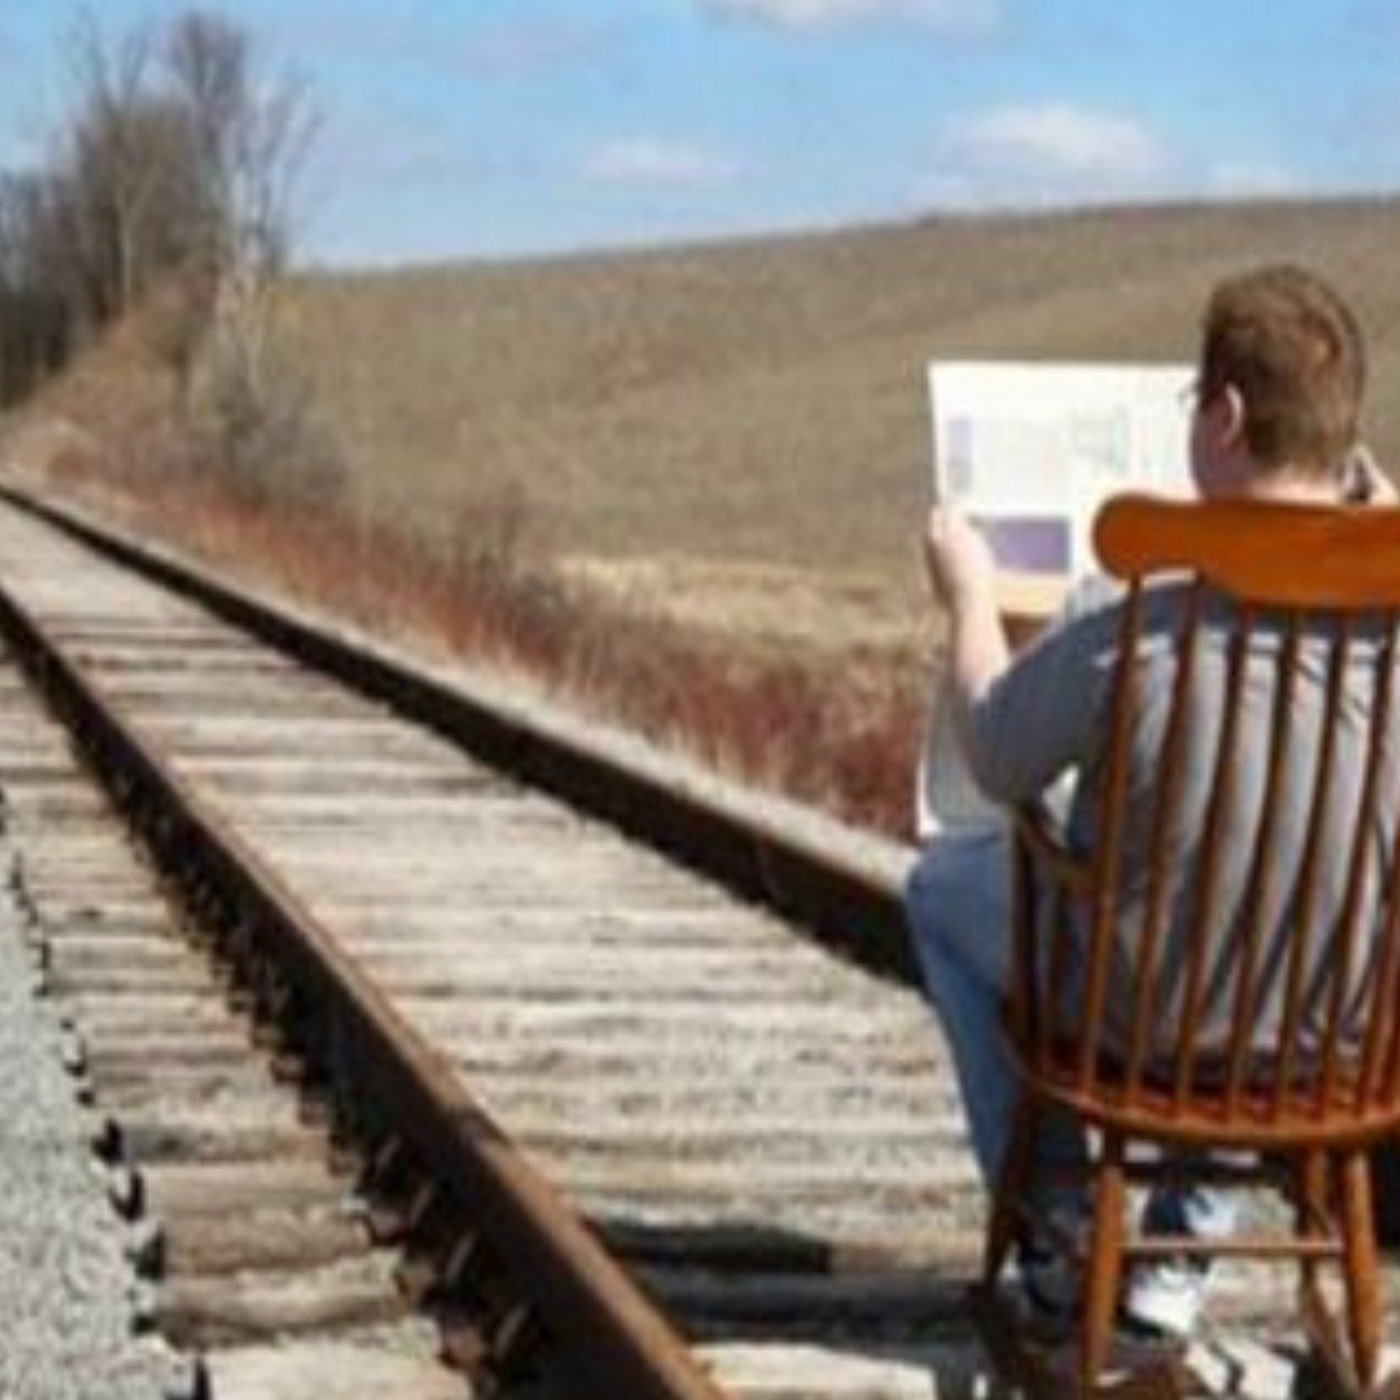 man sitting in chair on train tracks reading newspaper